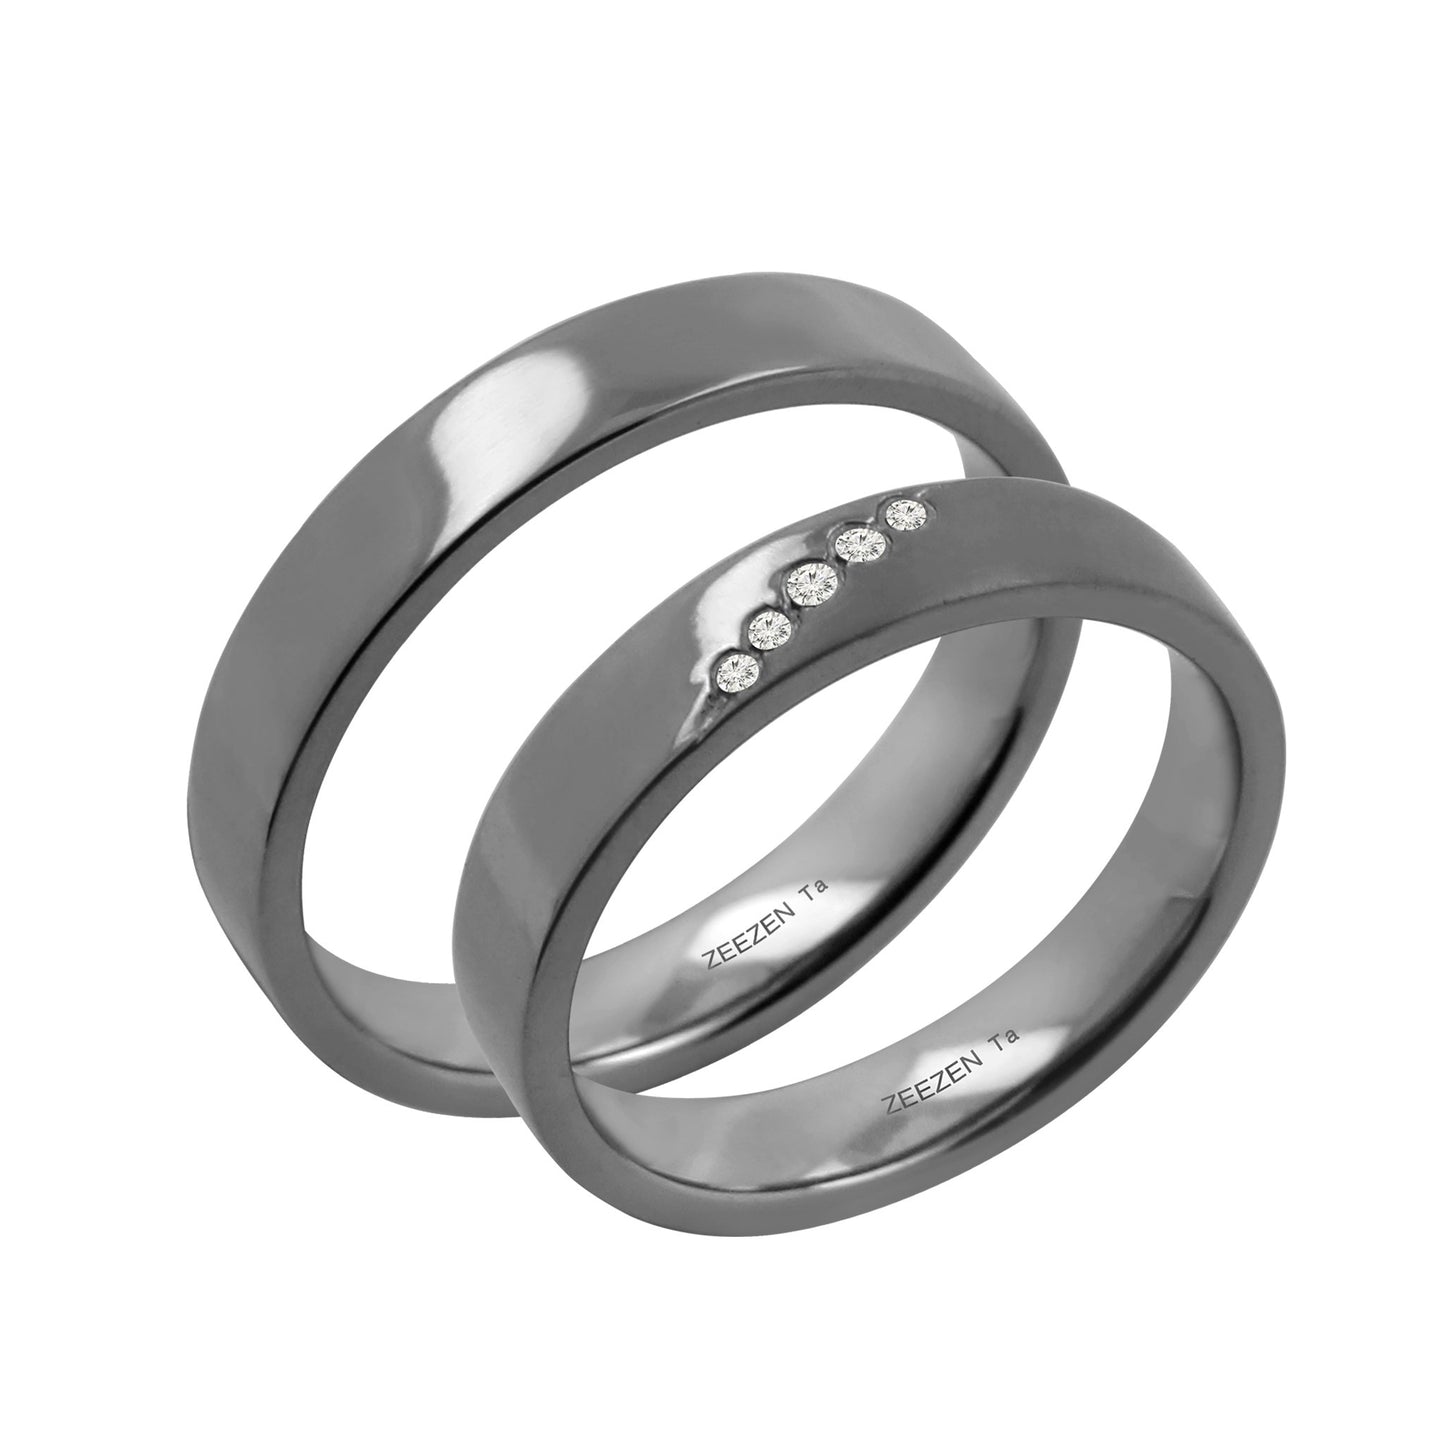 Tantalum Ring w/o min. Polished Ring profile: width: 4.0 mm || height: 1.6 mm. next to a matching couple ring with five lab grown diamonds going diagonally up from left to right.